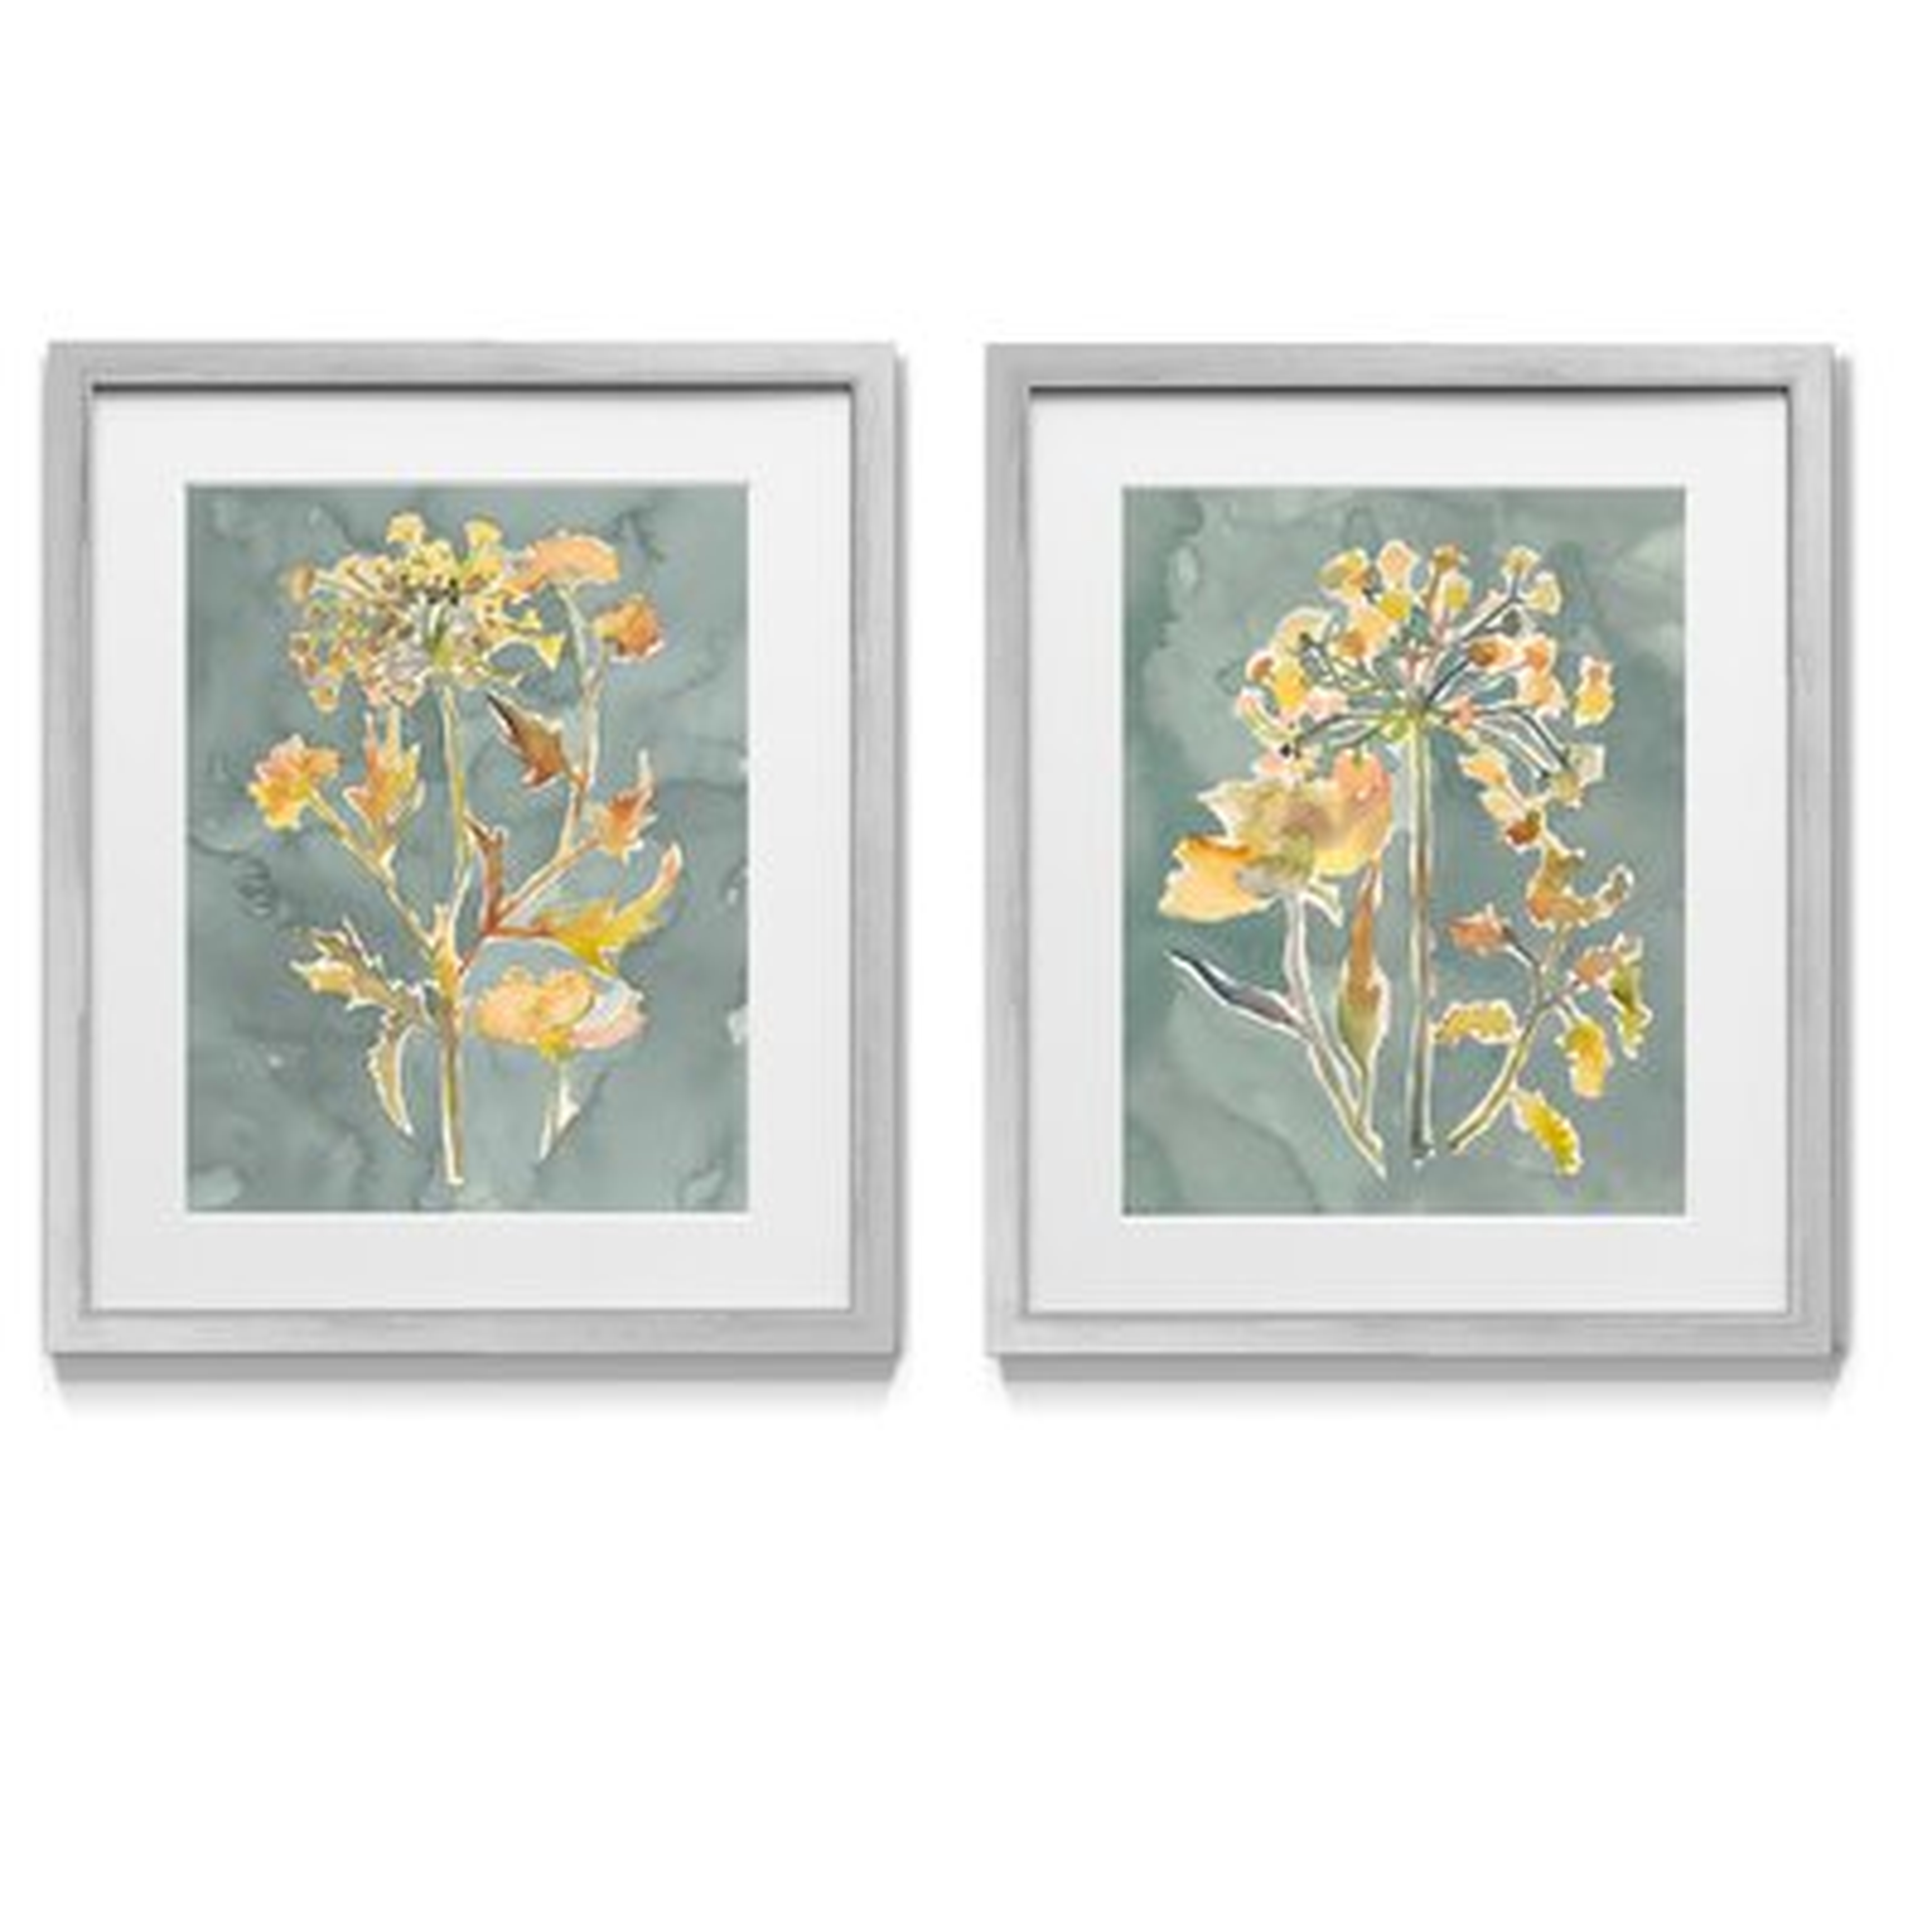 Collected Florals I - 2 Piece Picture Frame Graphic Art Print Set on Paper - Wayfair